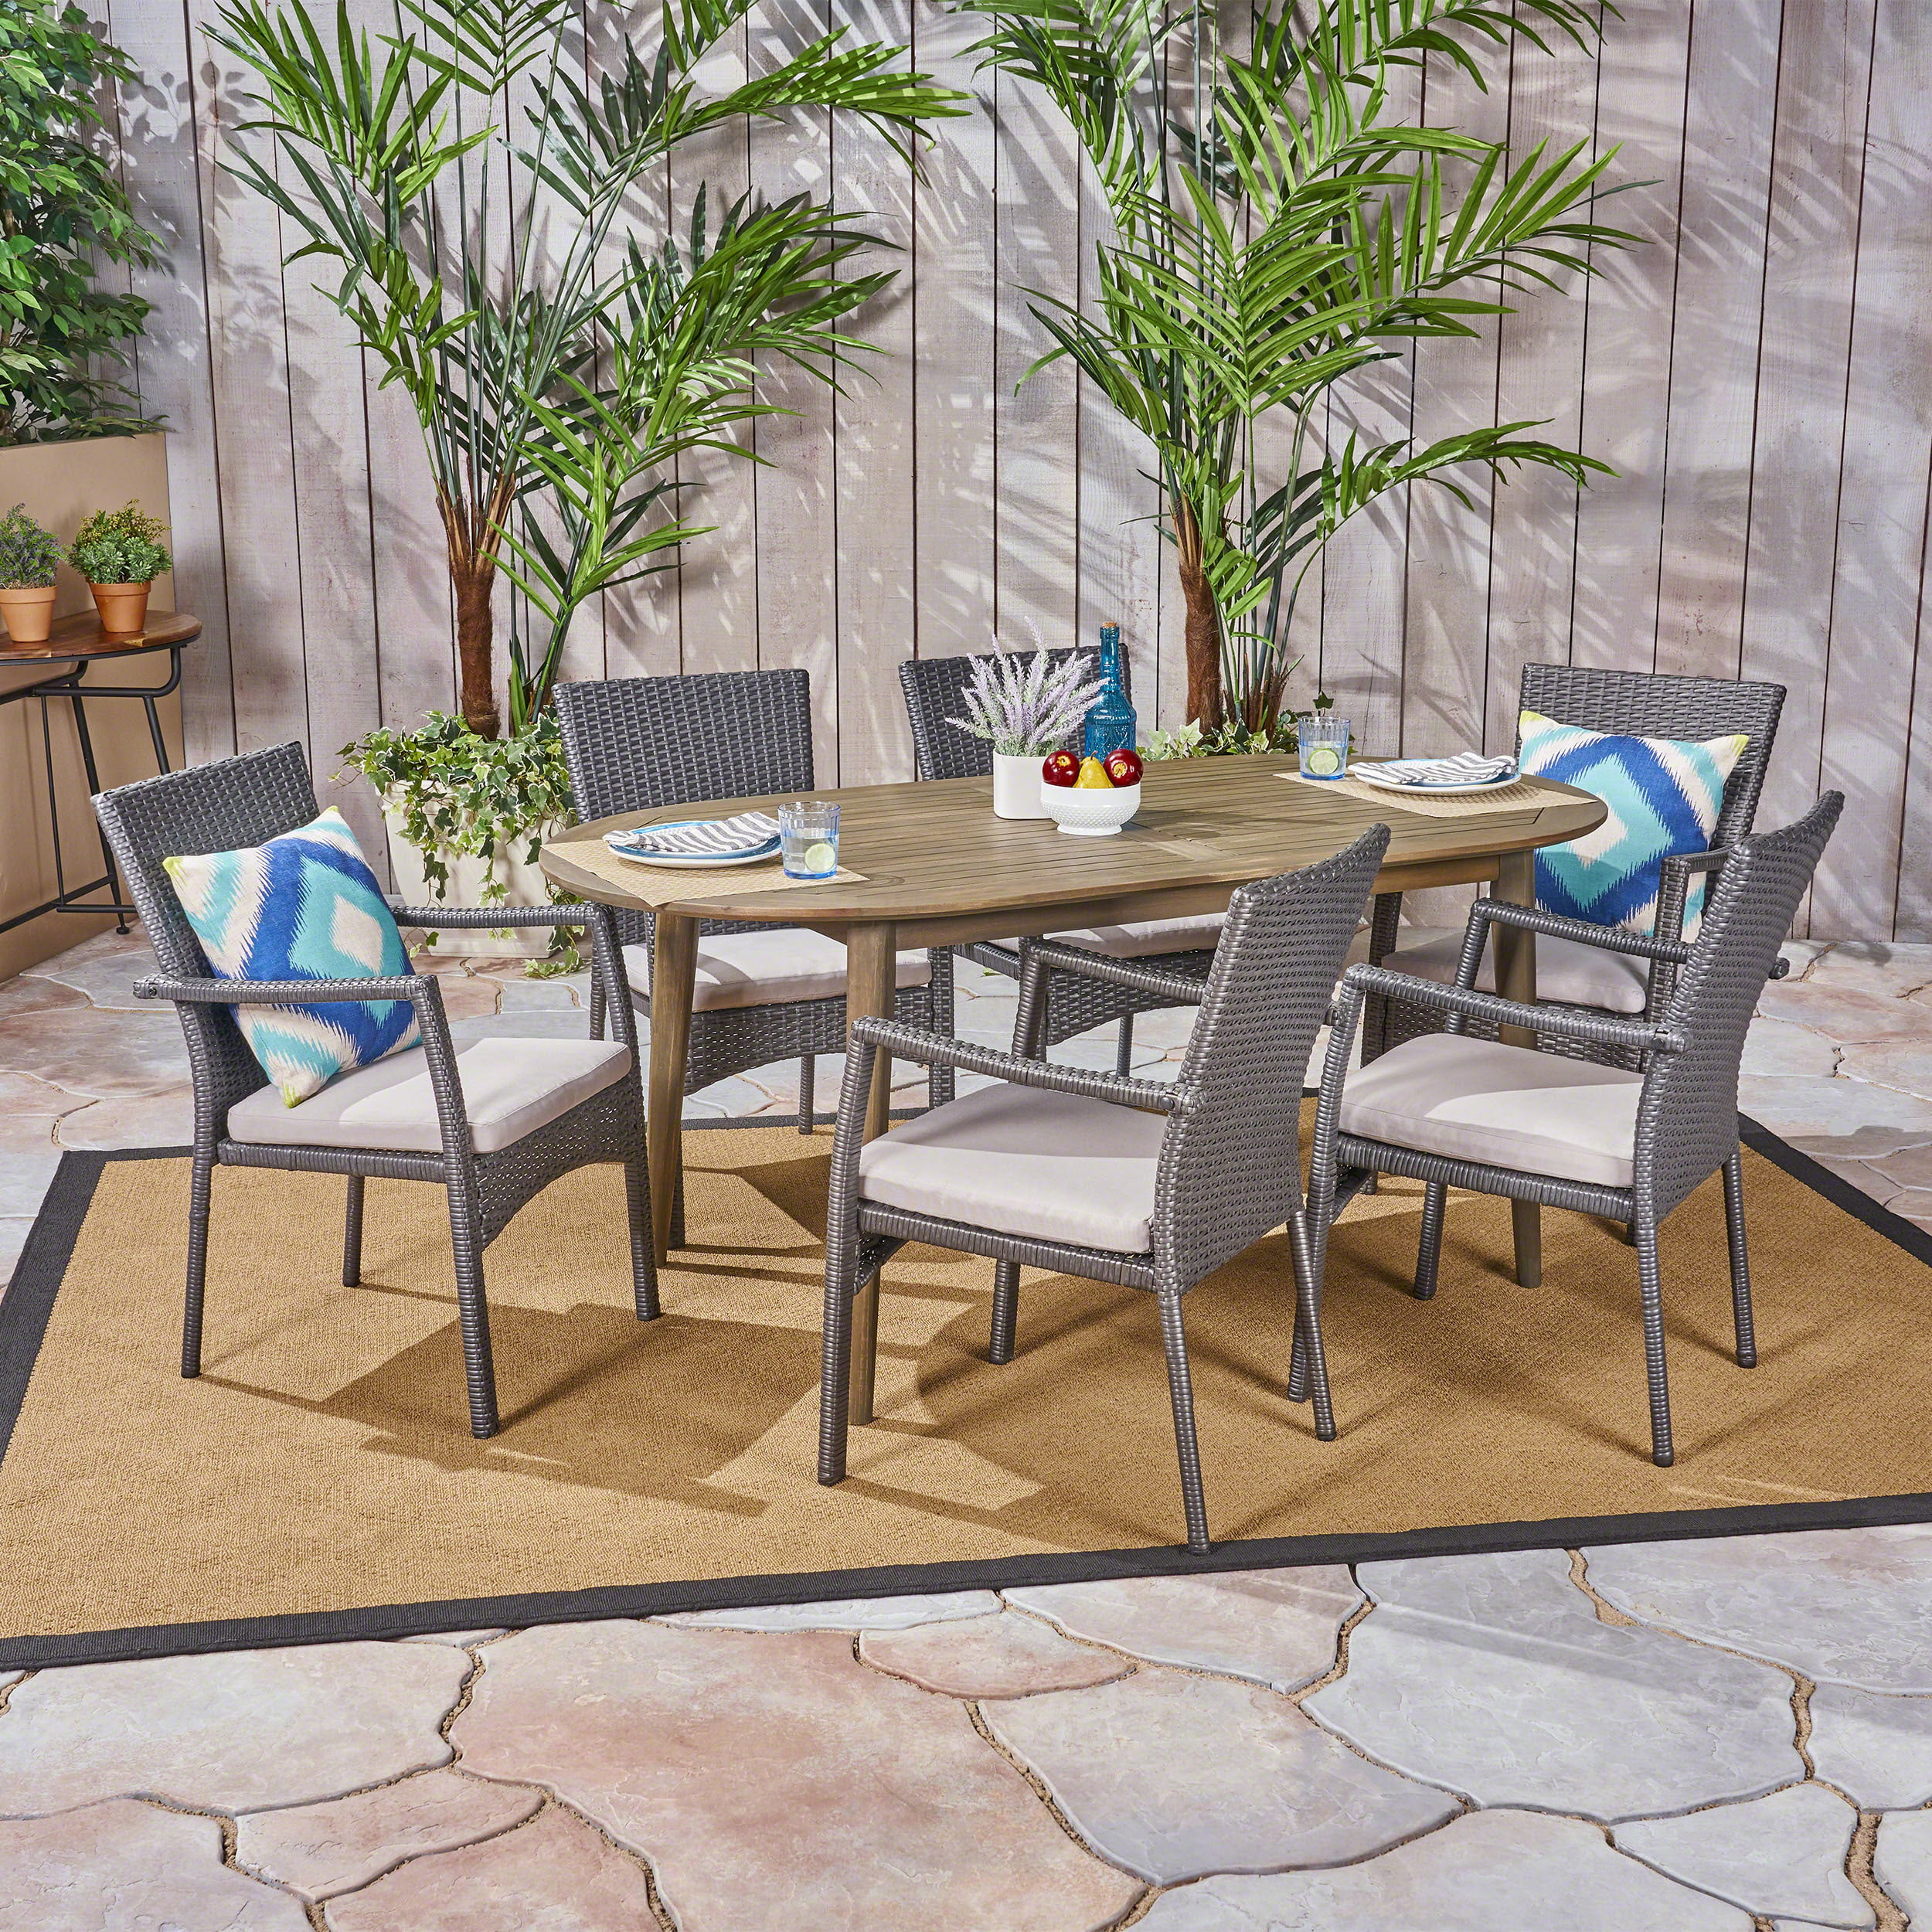 Jaxson Outdoor 7 Piece Acacia Wood Dining Set with Wicker Chairs and ...